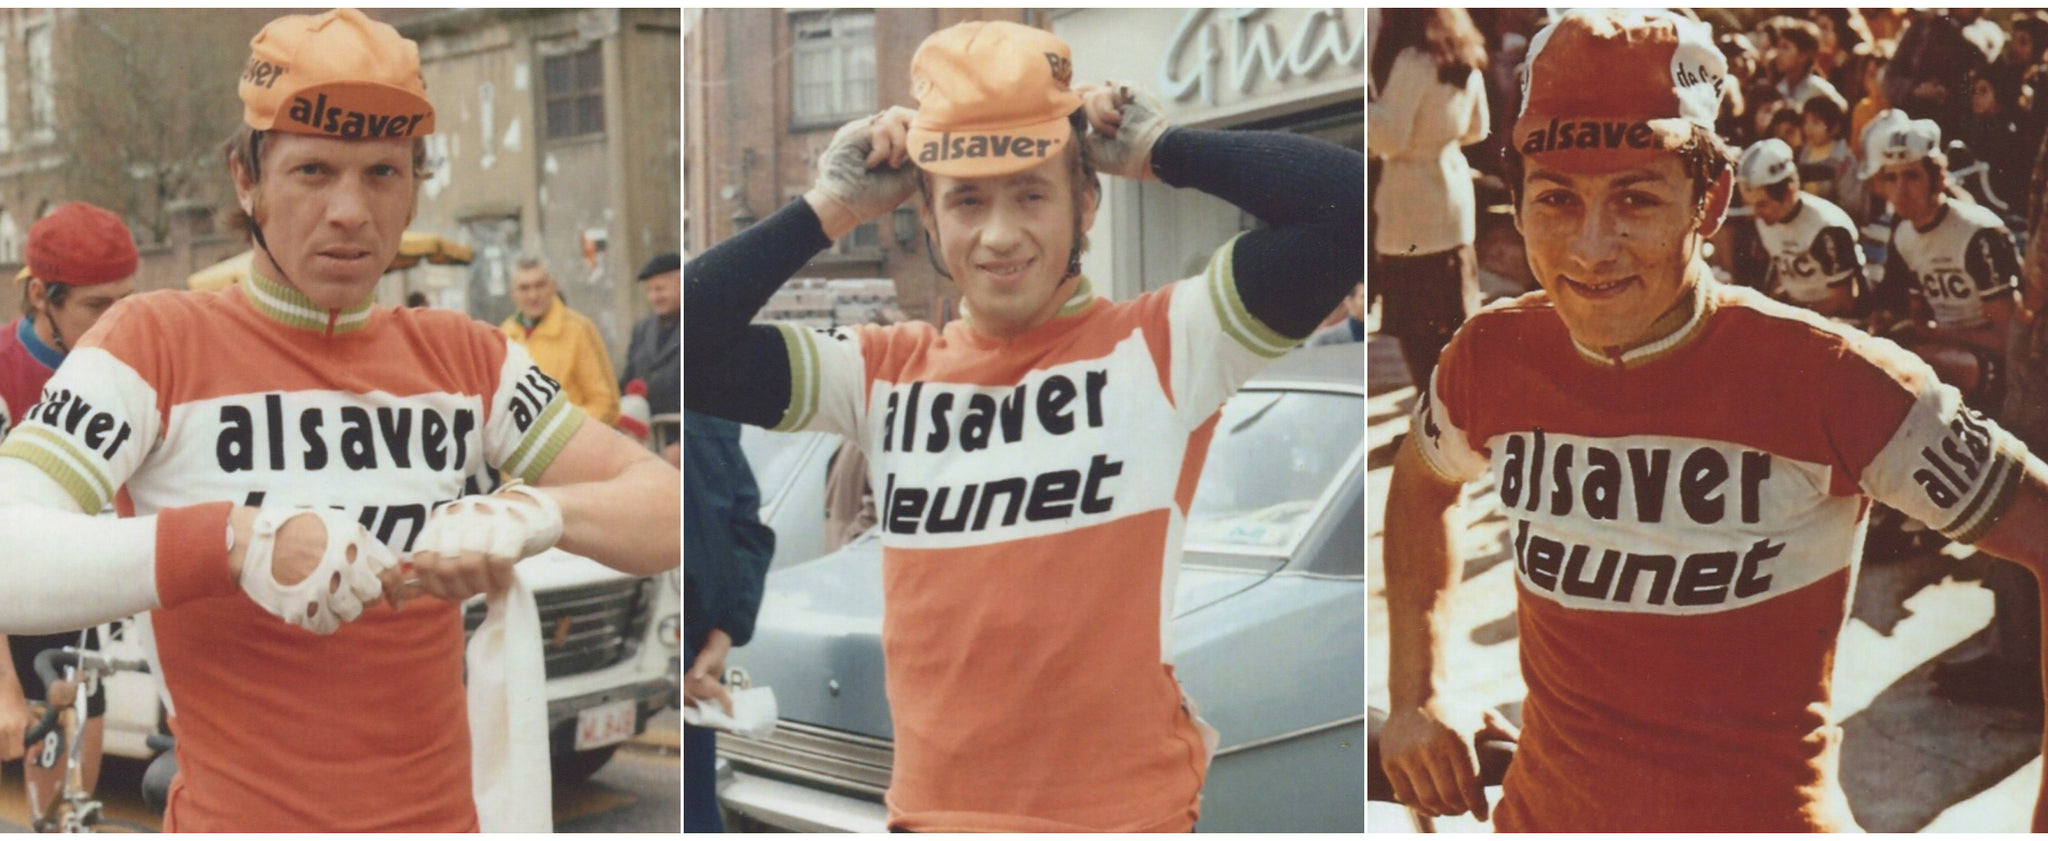 Alsaver Jeunet 1975 Cycling team members: G. Van Roosbroeck, T. Gakens and H. Mathis.